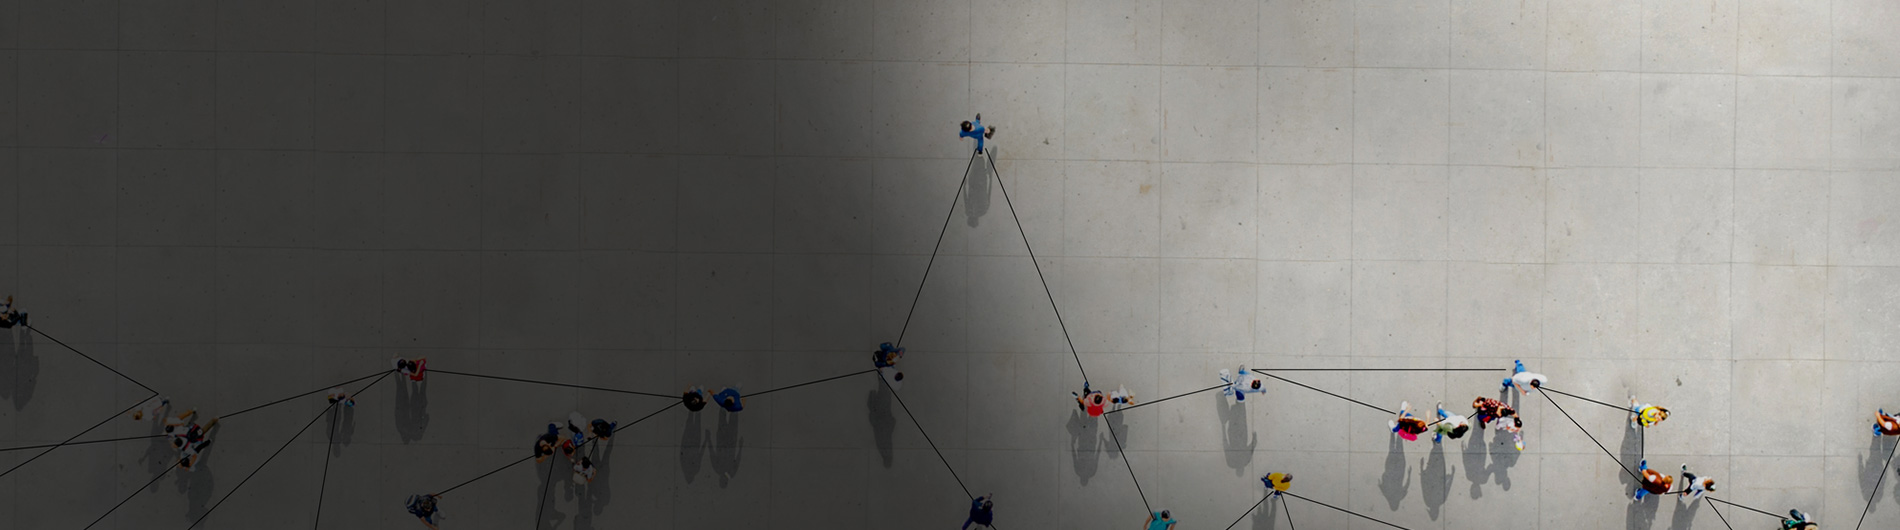 arial view of people walking with connecting lines 